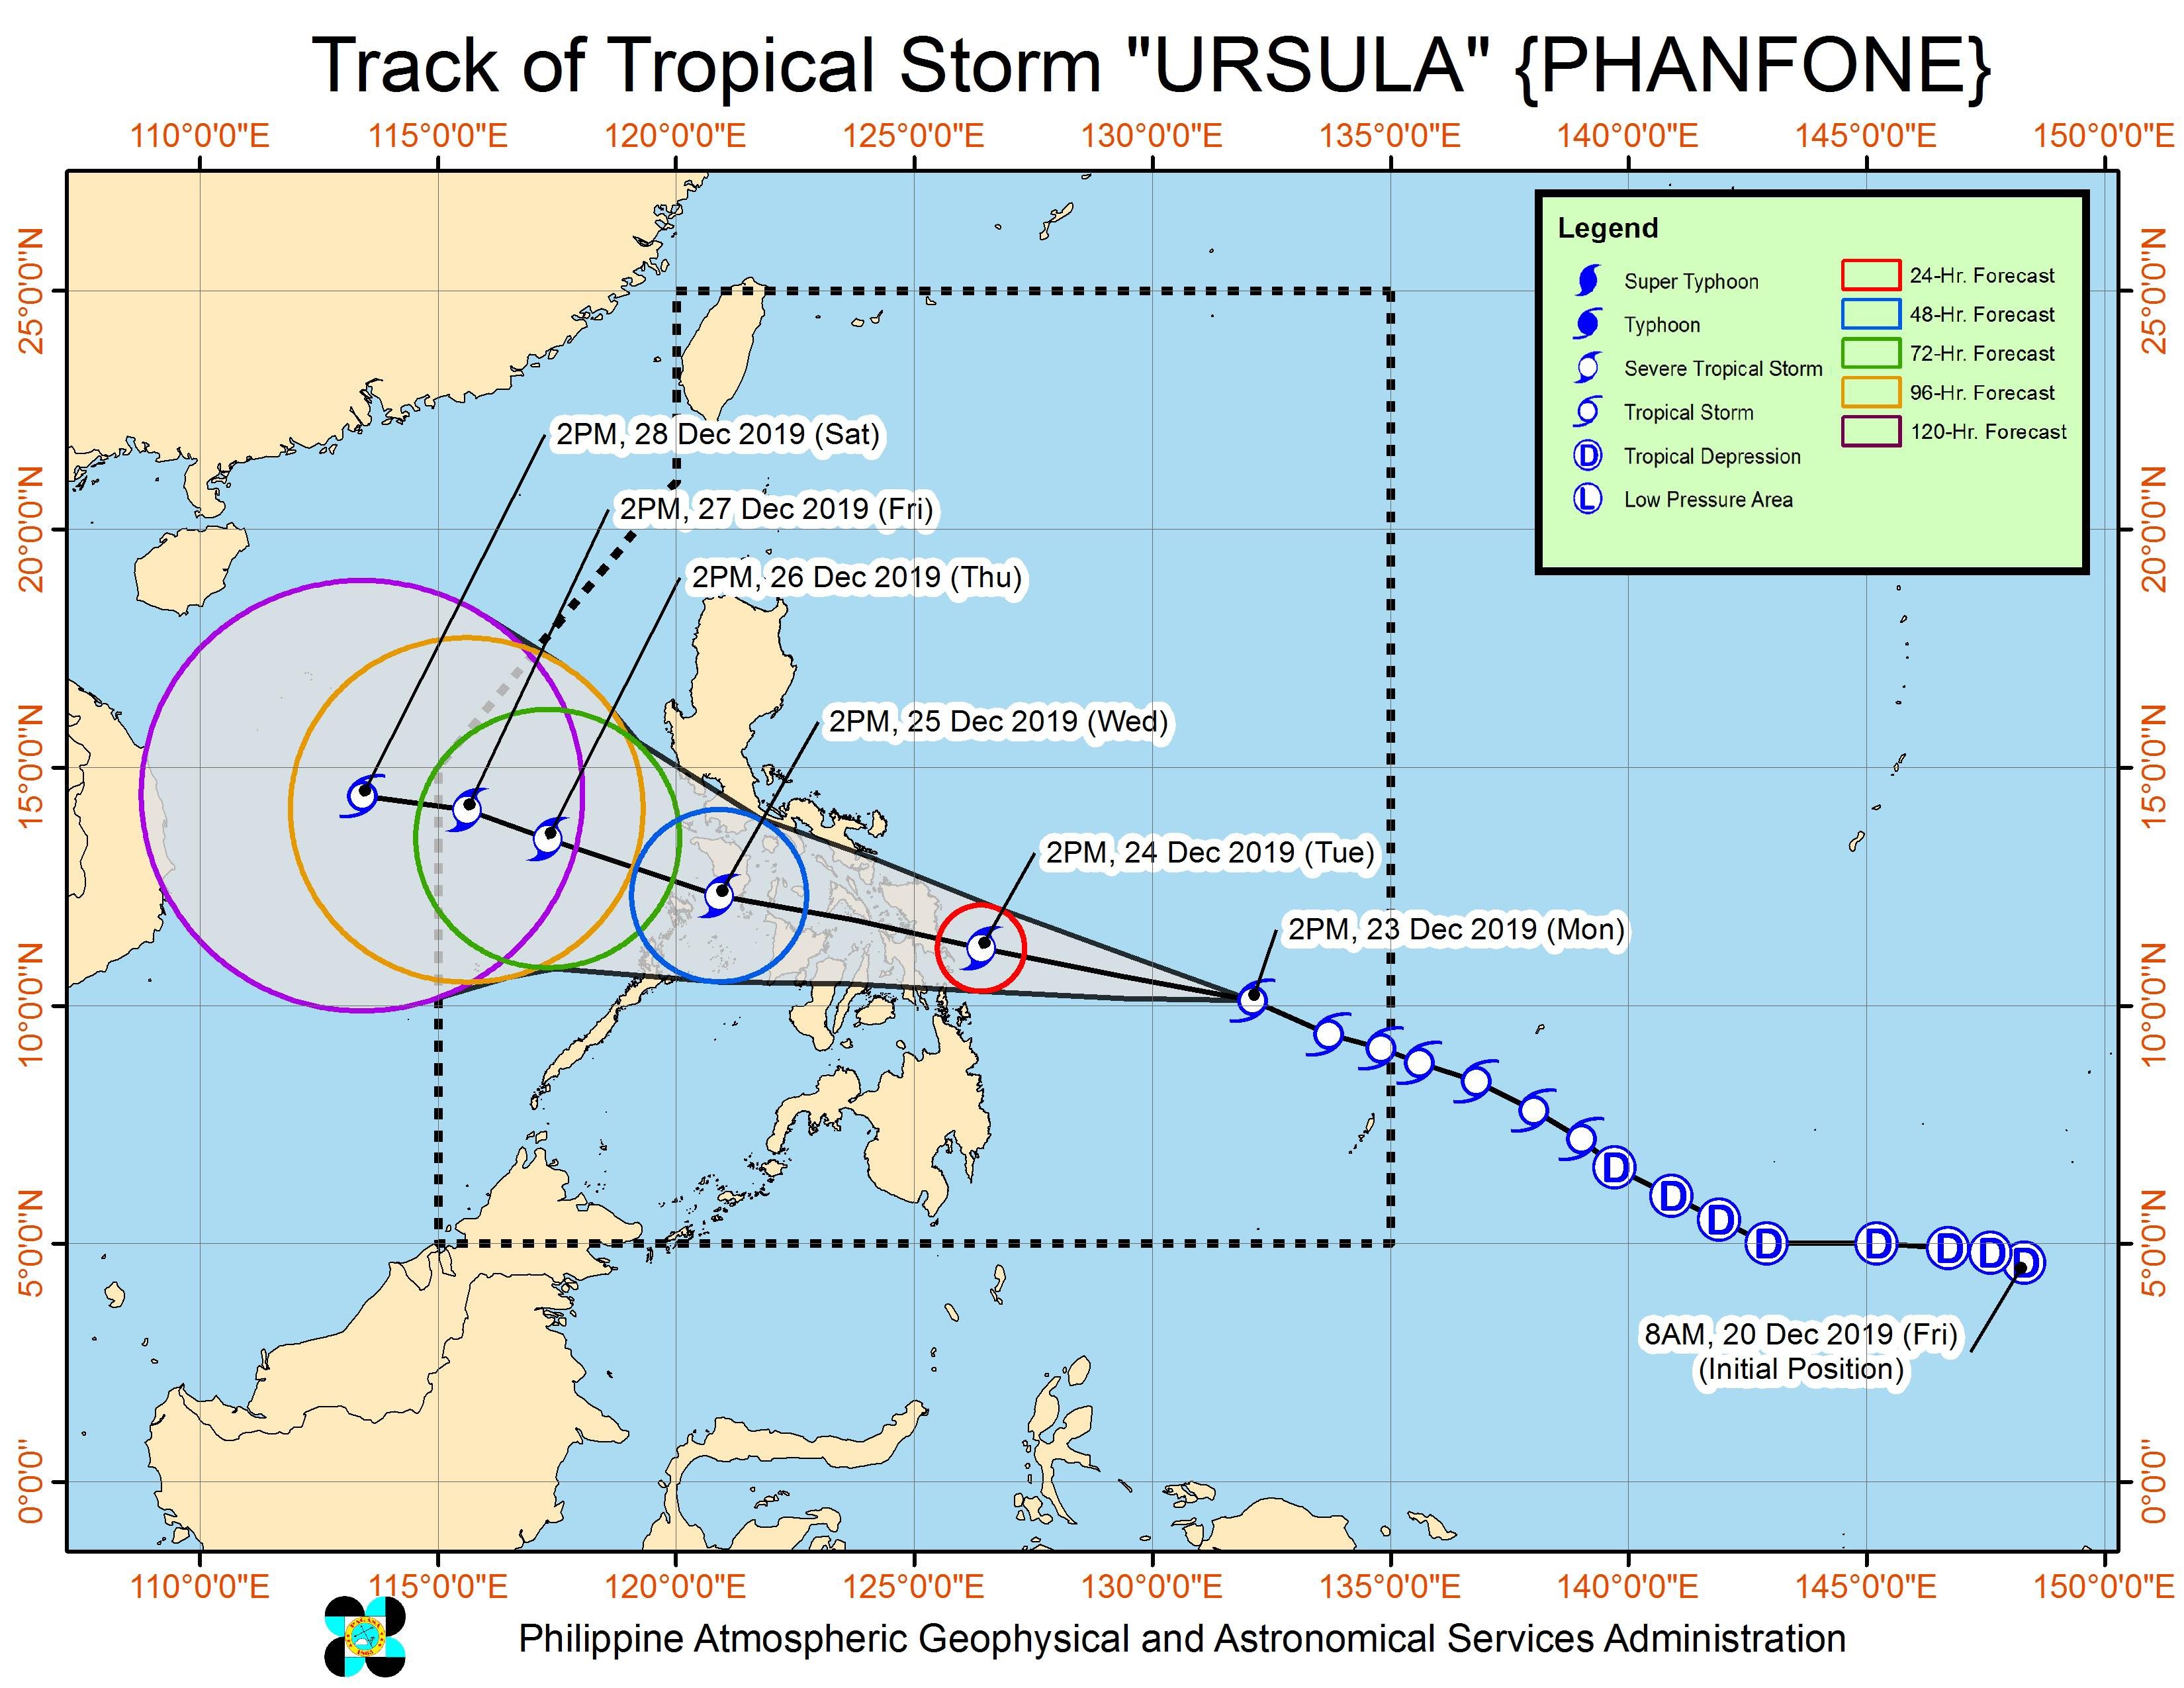 Forecast track of Tropical Storm Ursula (Phanfone) as of December 23, 2019, 5 pm. Image from PAGASA 